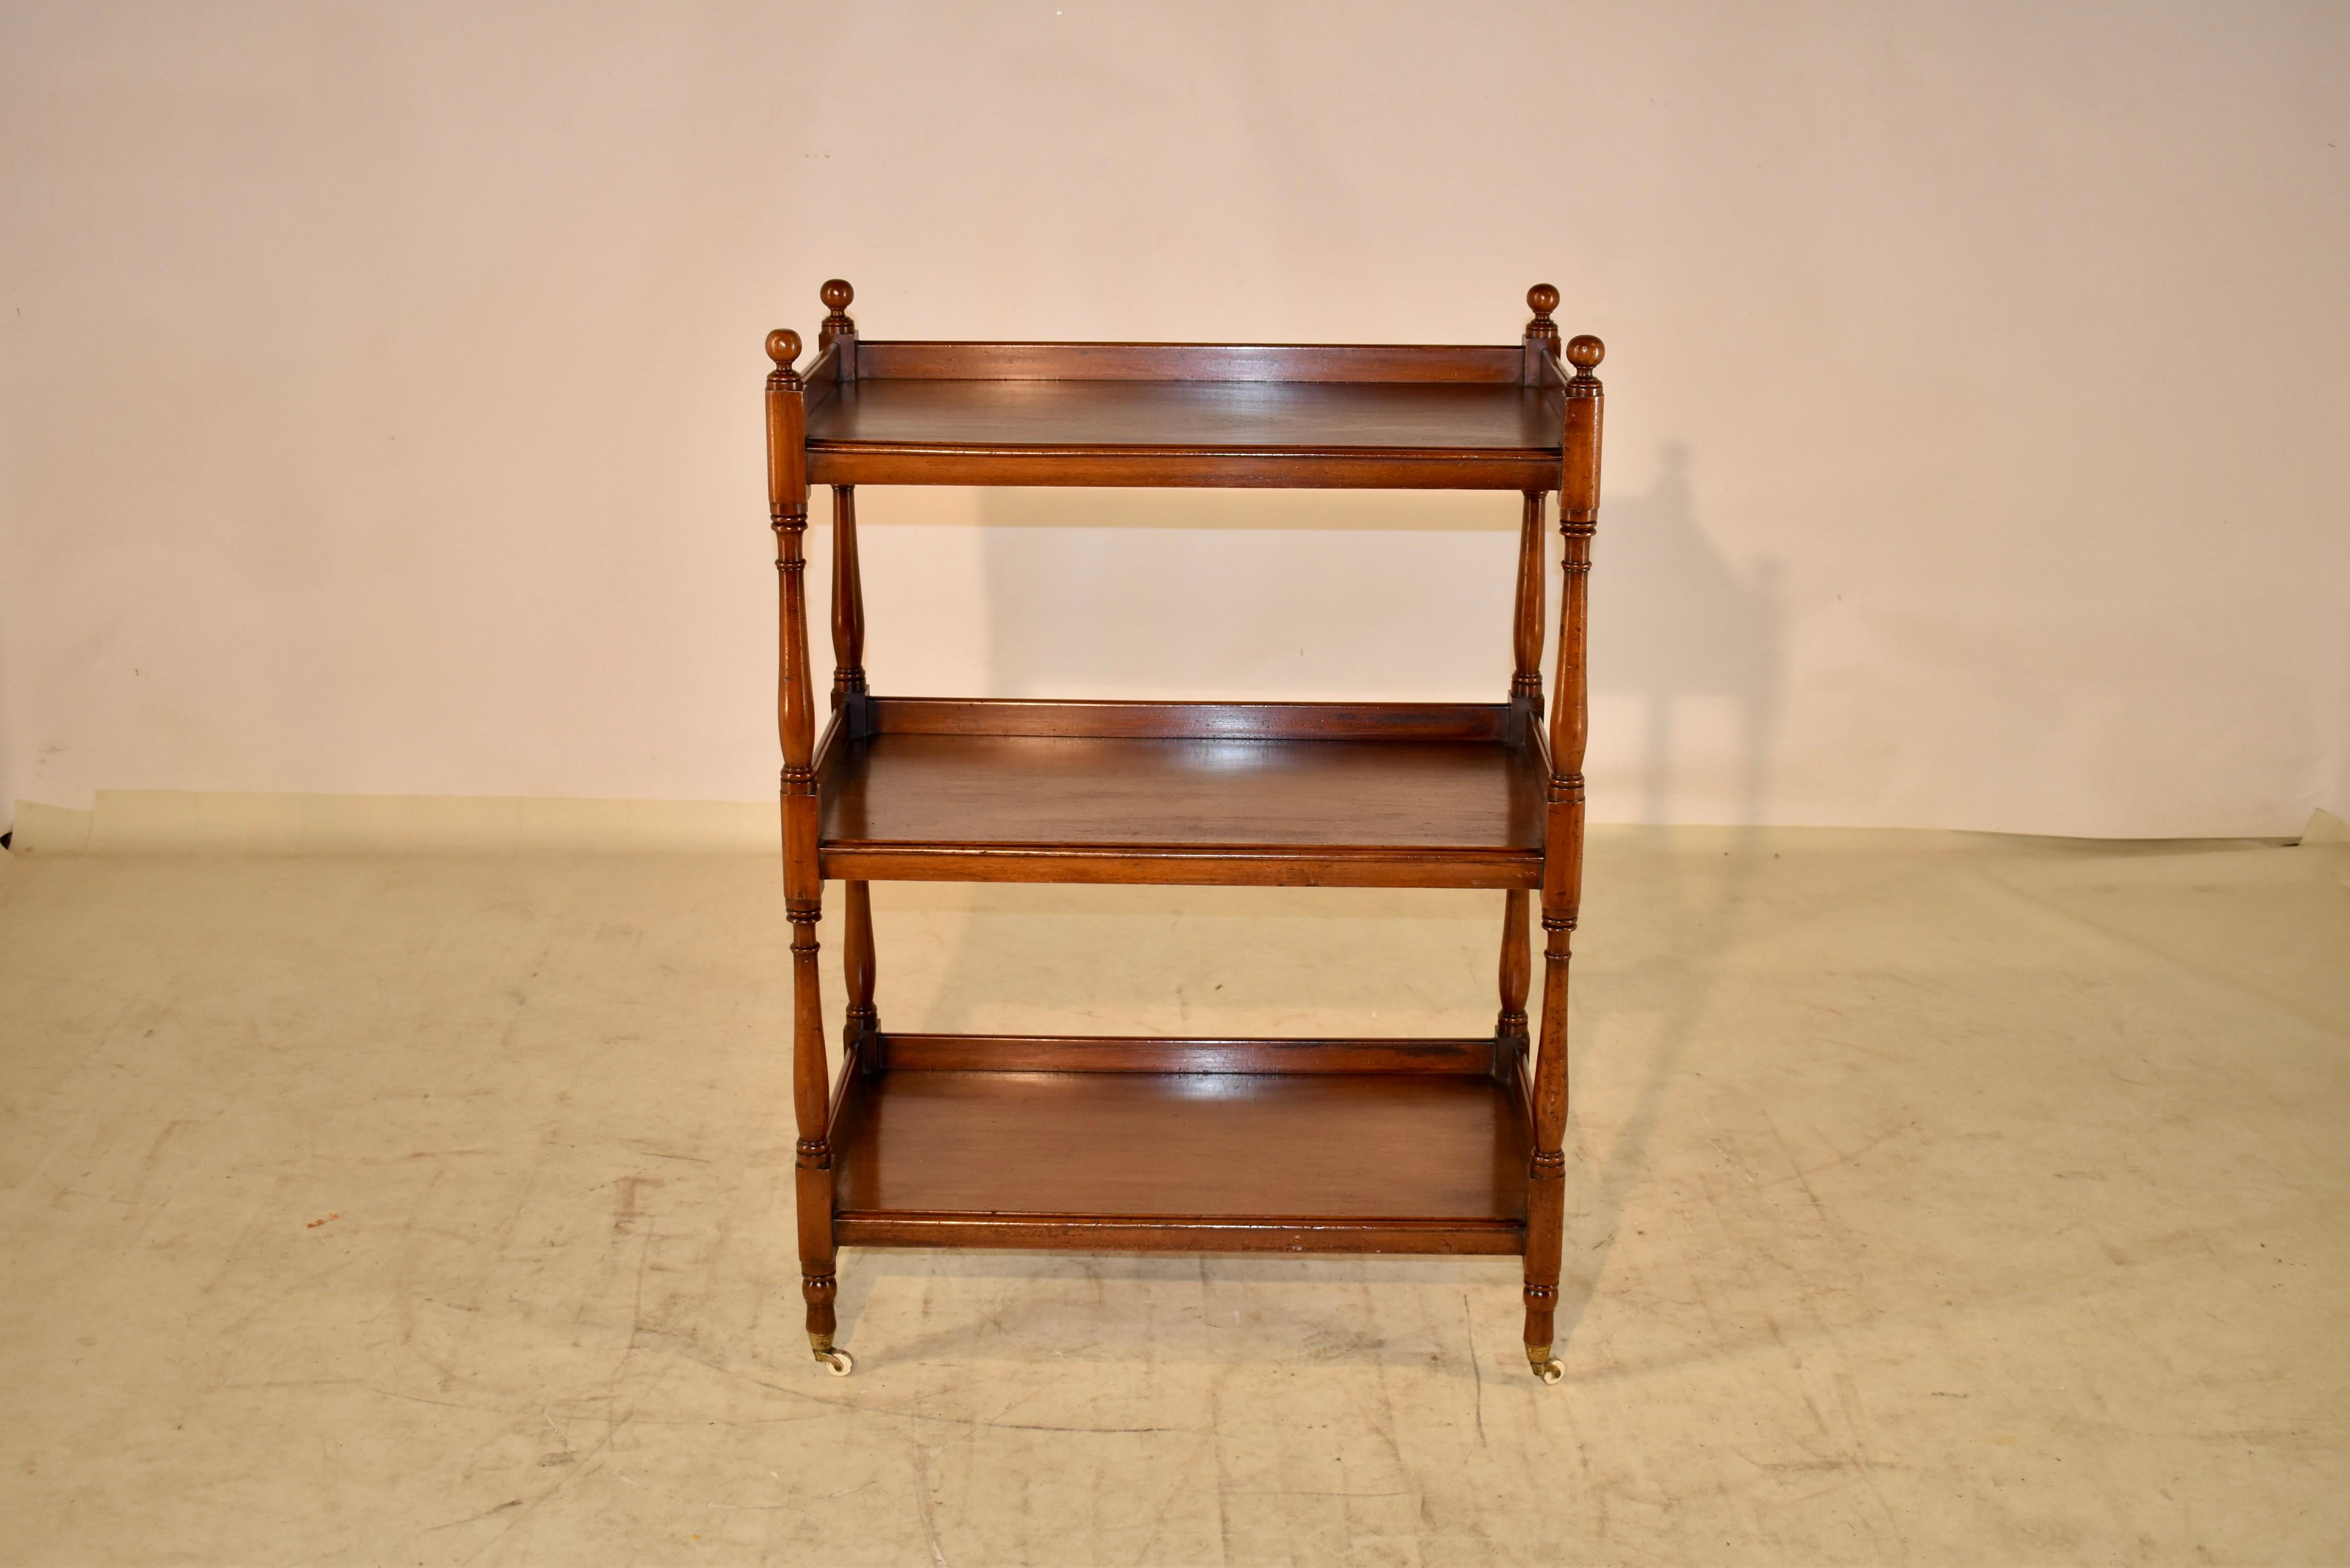 19th century mahogany buffet or shelf from England. The top has turned finials over three shelves with galleries. The shelves are separated by hand turned legs, which end in the original porcelain and brass casters. The shelves have lovely graining